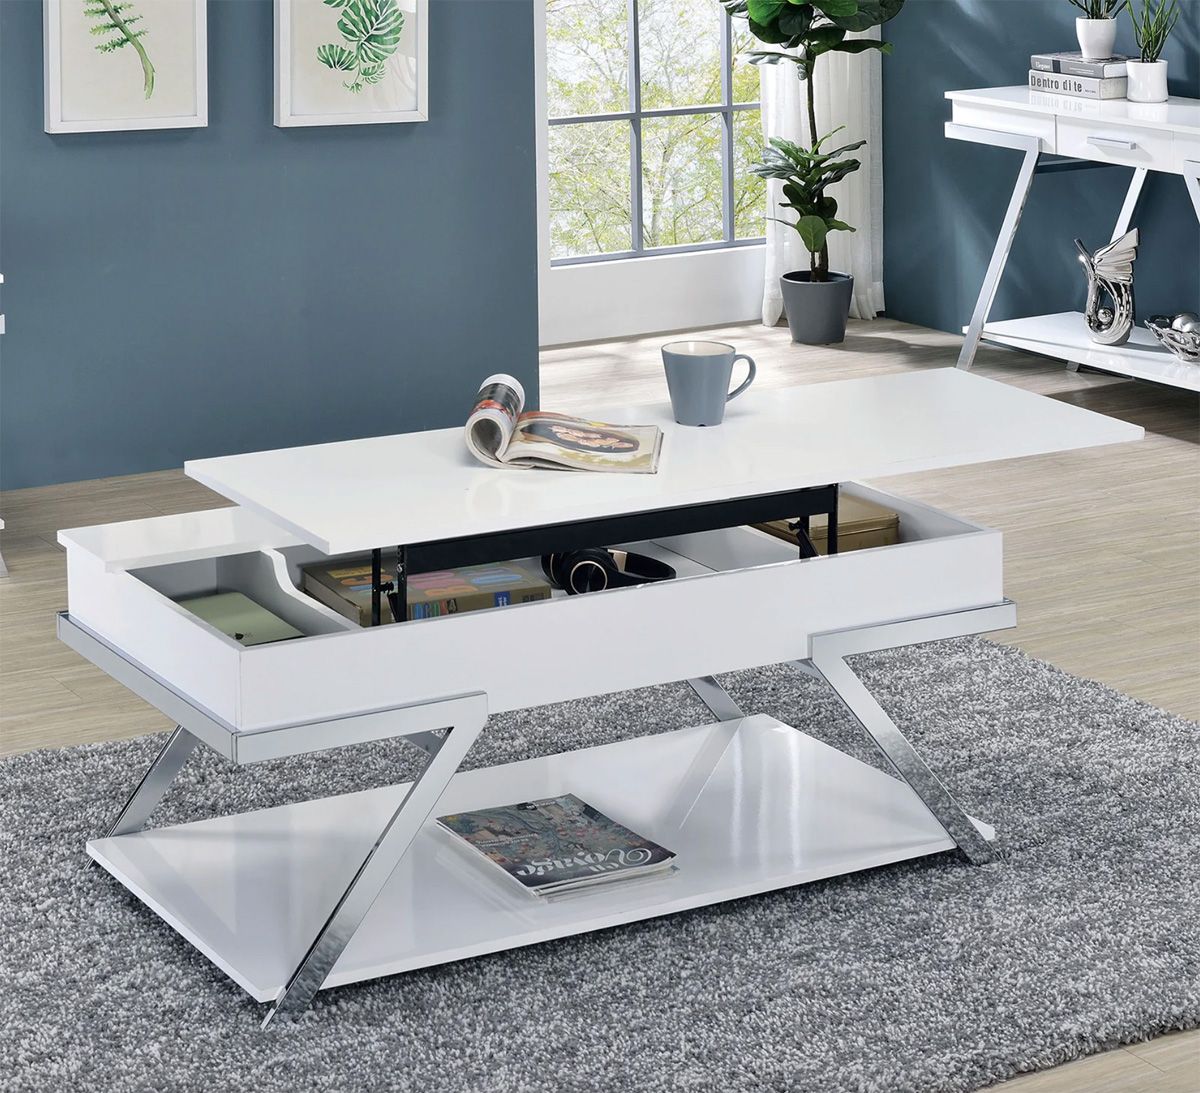 Cermak Lift Top Modern Coffee Table